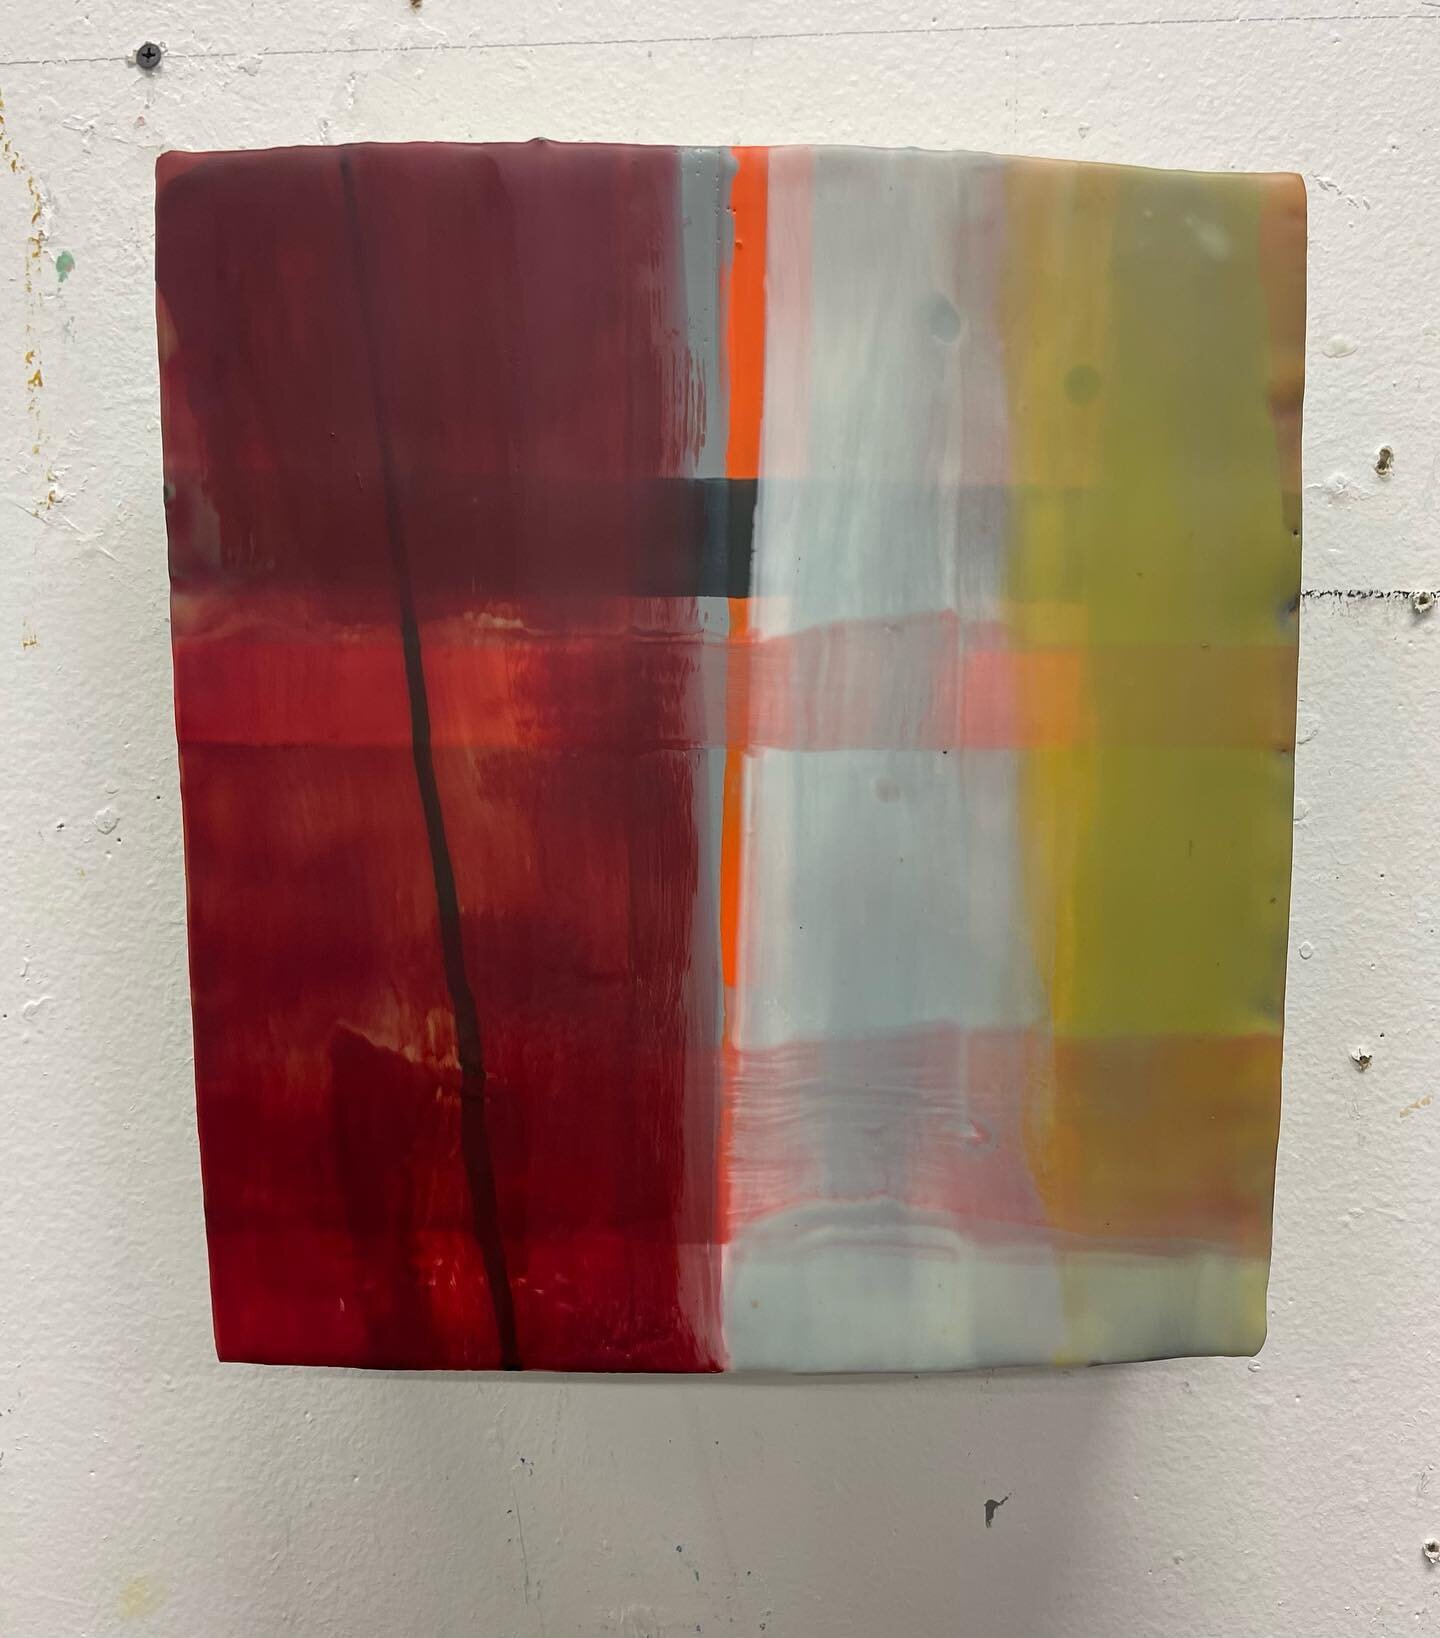 Work in progress..encaustic on shaped panel, 13 x 12.
Starting two others this size and a few mid-sized panels.
.
.
.
#contemporaryart 
#contemporarypainting 
#addingtongallery 
#brandtrobertsgalleries 
#workinprogress 
#encausticpainting